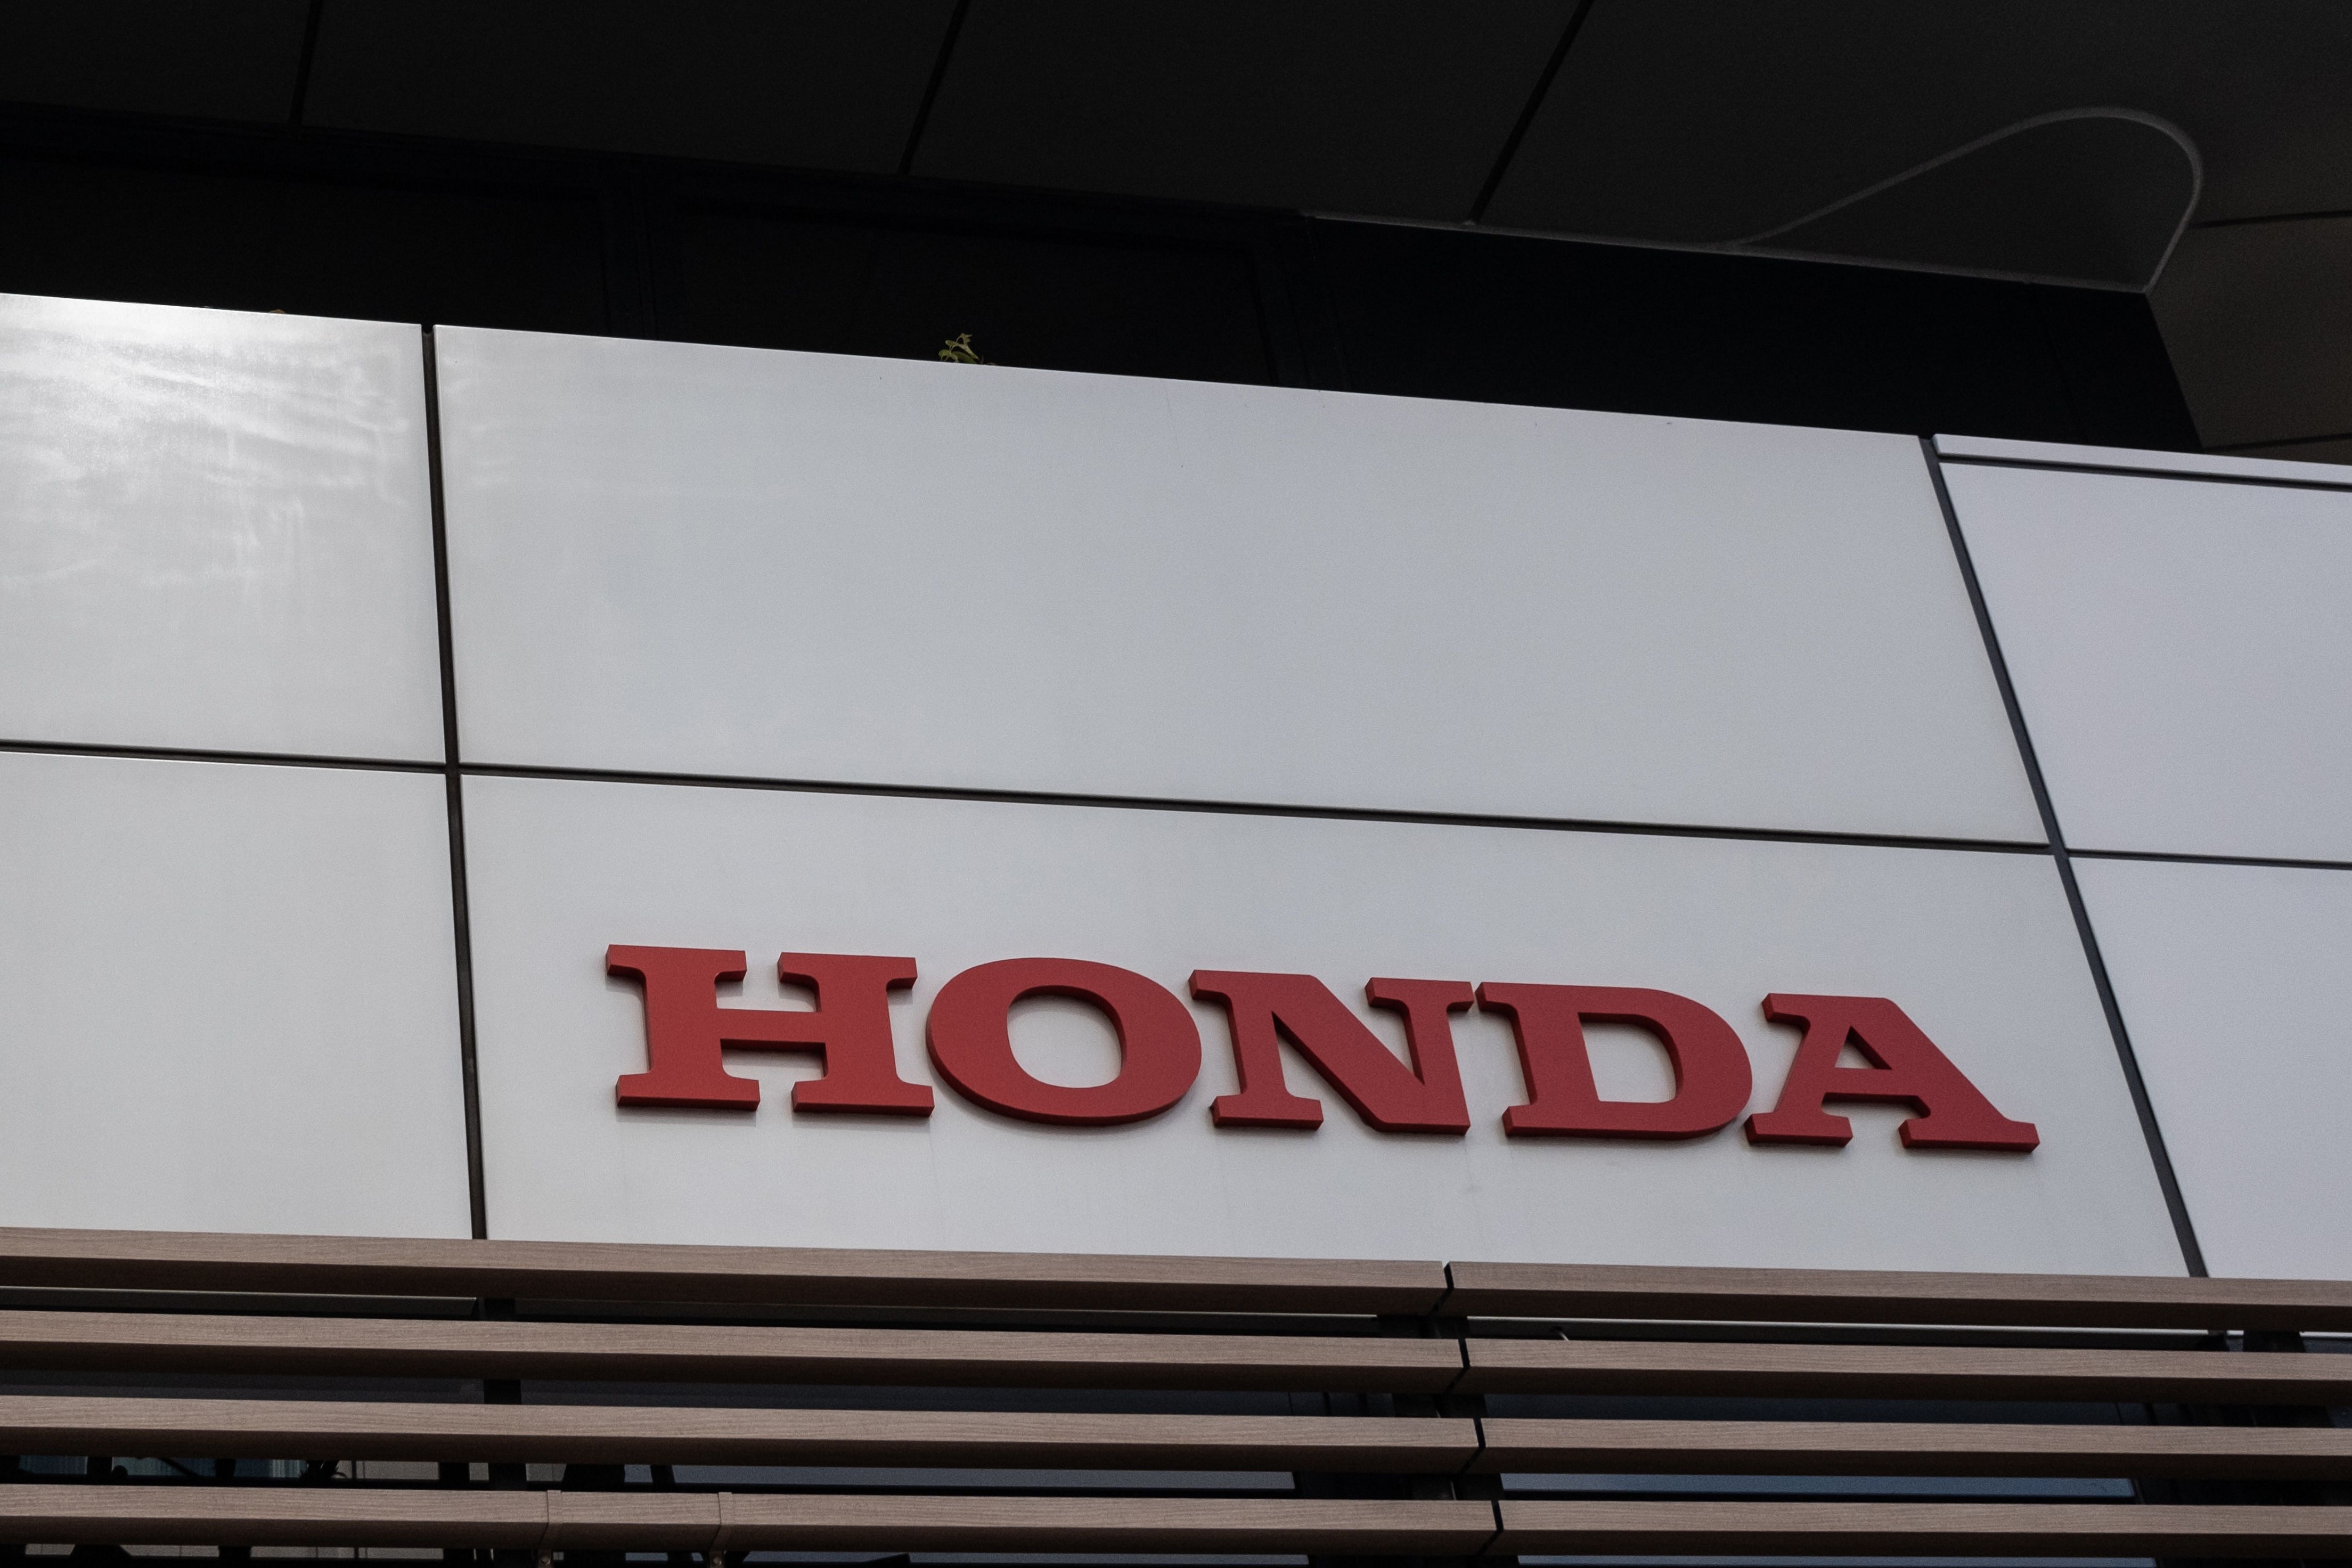 Honda and other global automakers have begun to gradually resume operations at their vehicle plants, but face weak demand as job losses and concern about a global economic downturn weigh on consumer spending. (AFP)